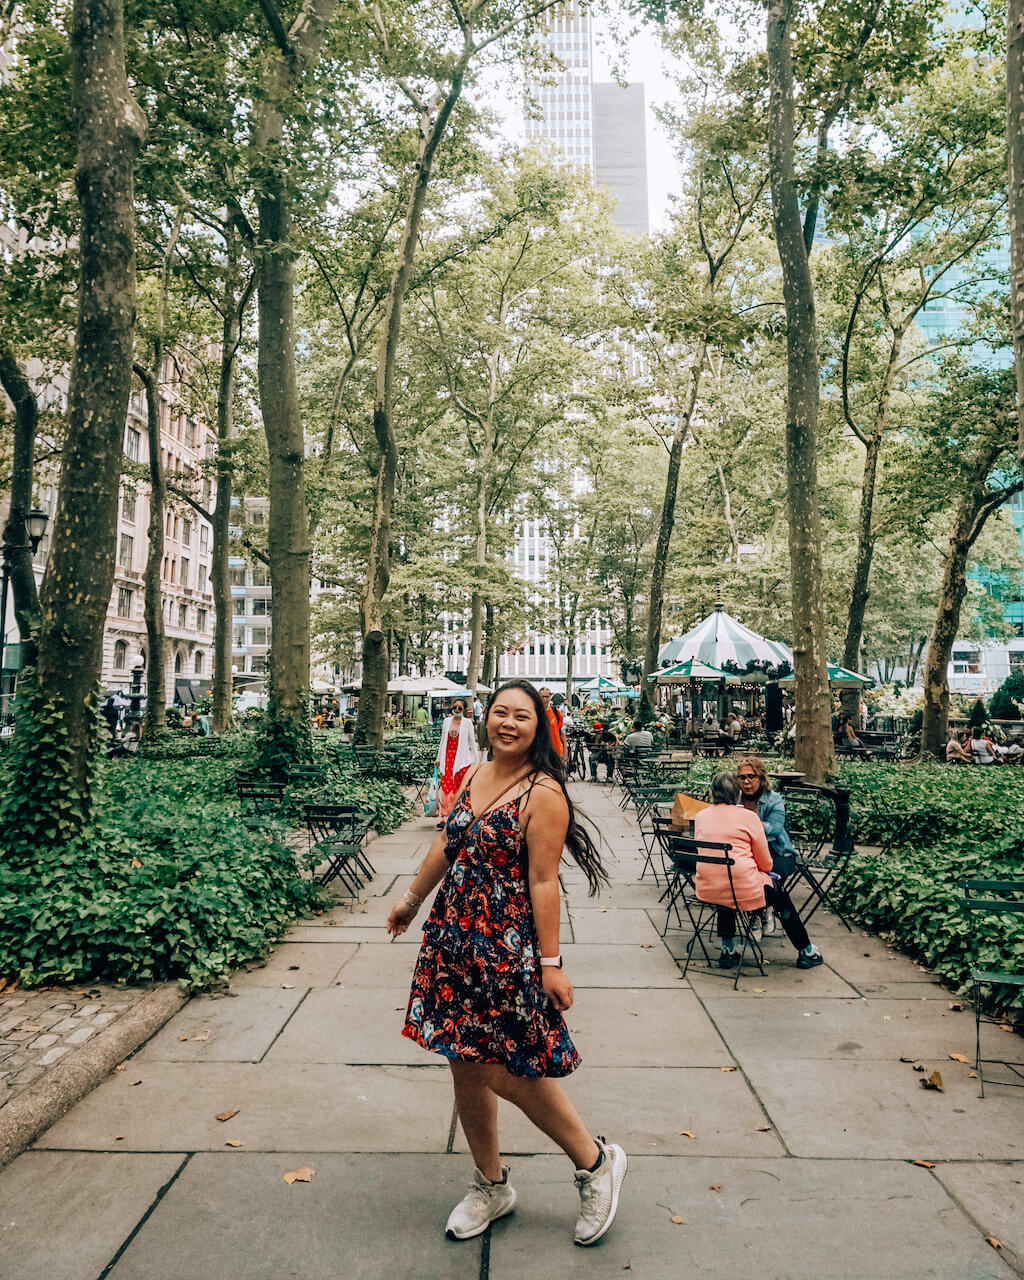 Instagrammable places in NYC: Bryant Park